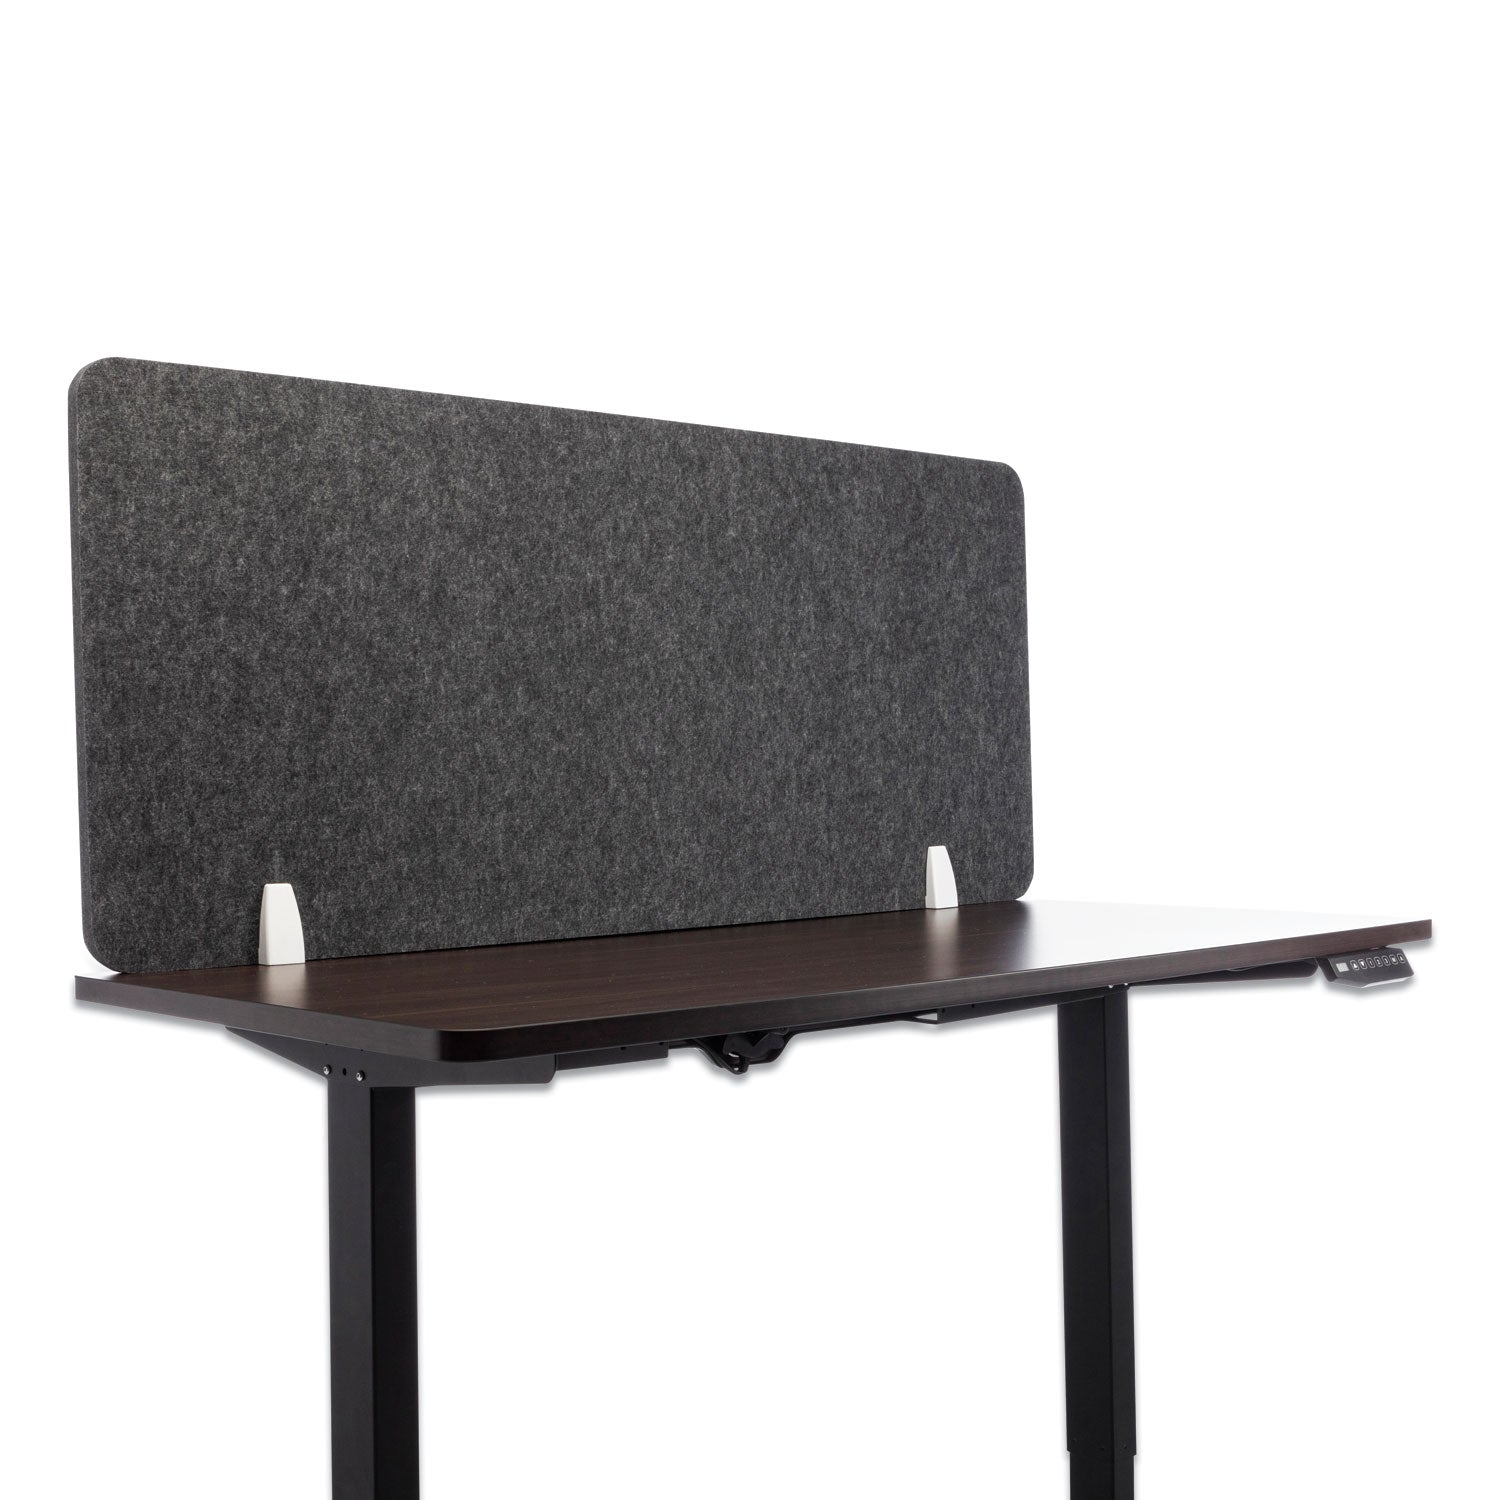 desk-screen-cubicle-panel-and-office-partition-privacy-screen-545-x-1-x-235-polyester-ash_gn1luds55241a - 1